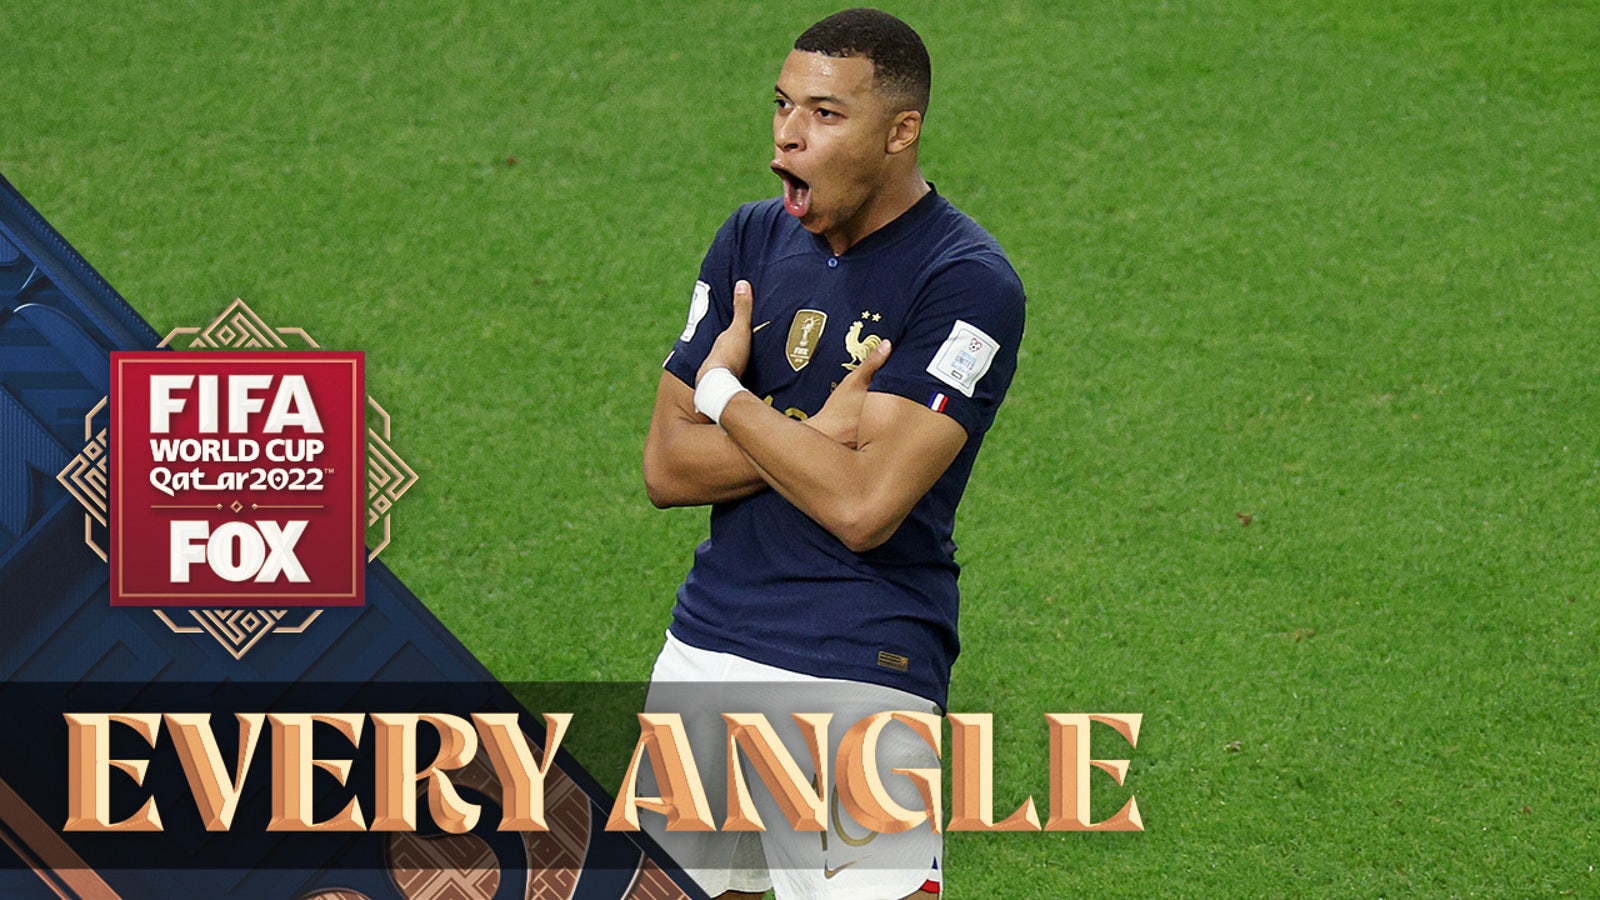 Kylian Mbappé goes SUPER for France, scoring 2 goals against Poland |  every angle